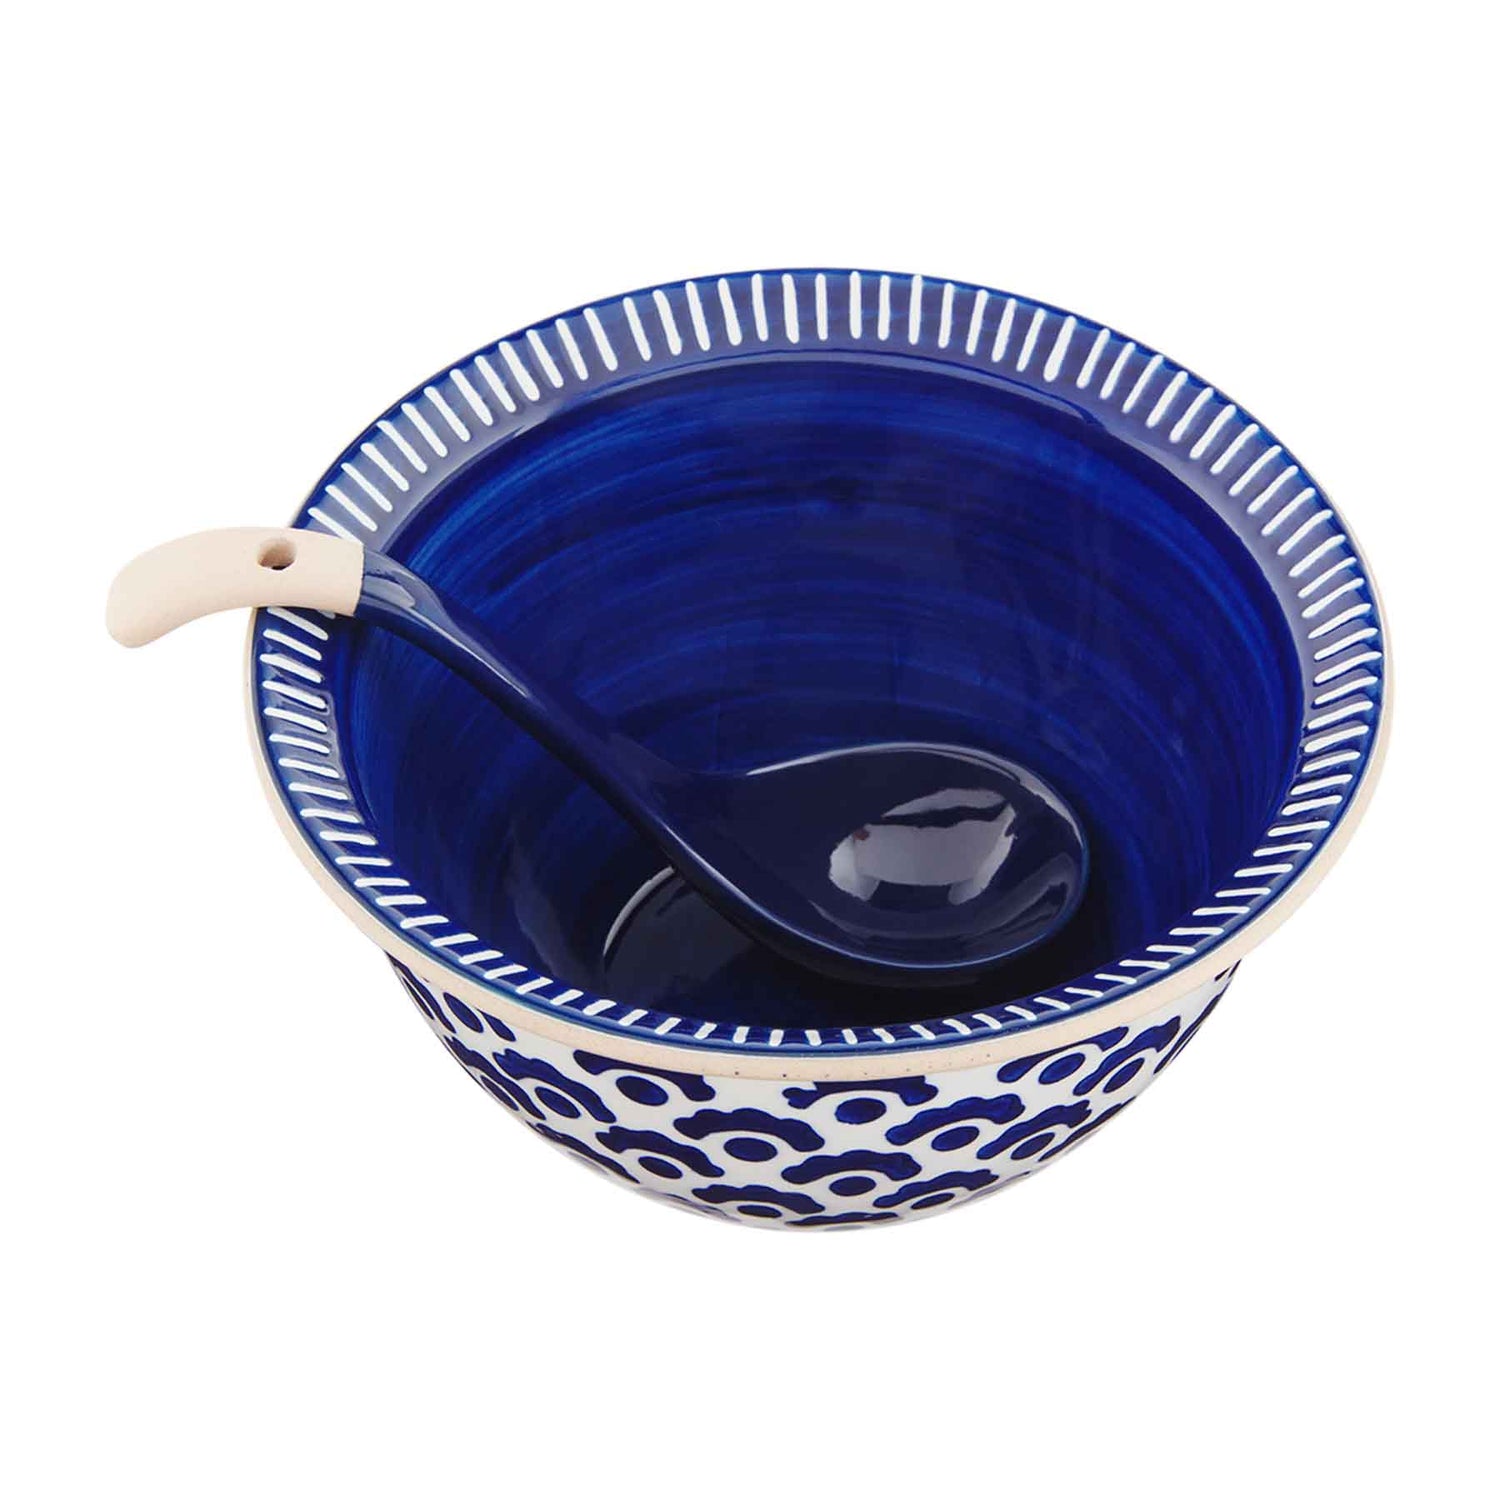 Mud Pie Indigo Salsa Bowl Set available at The Good Life Boutique